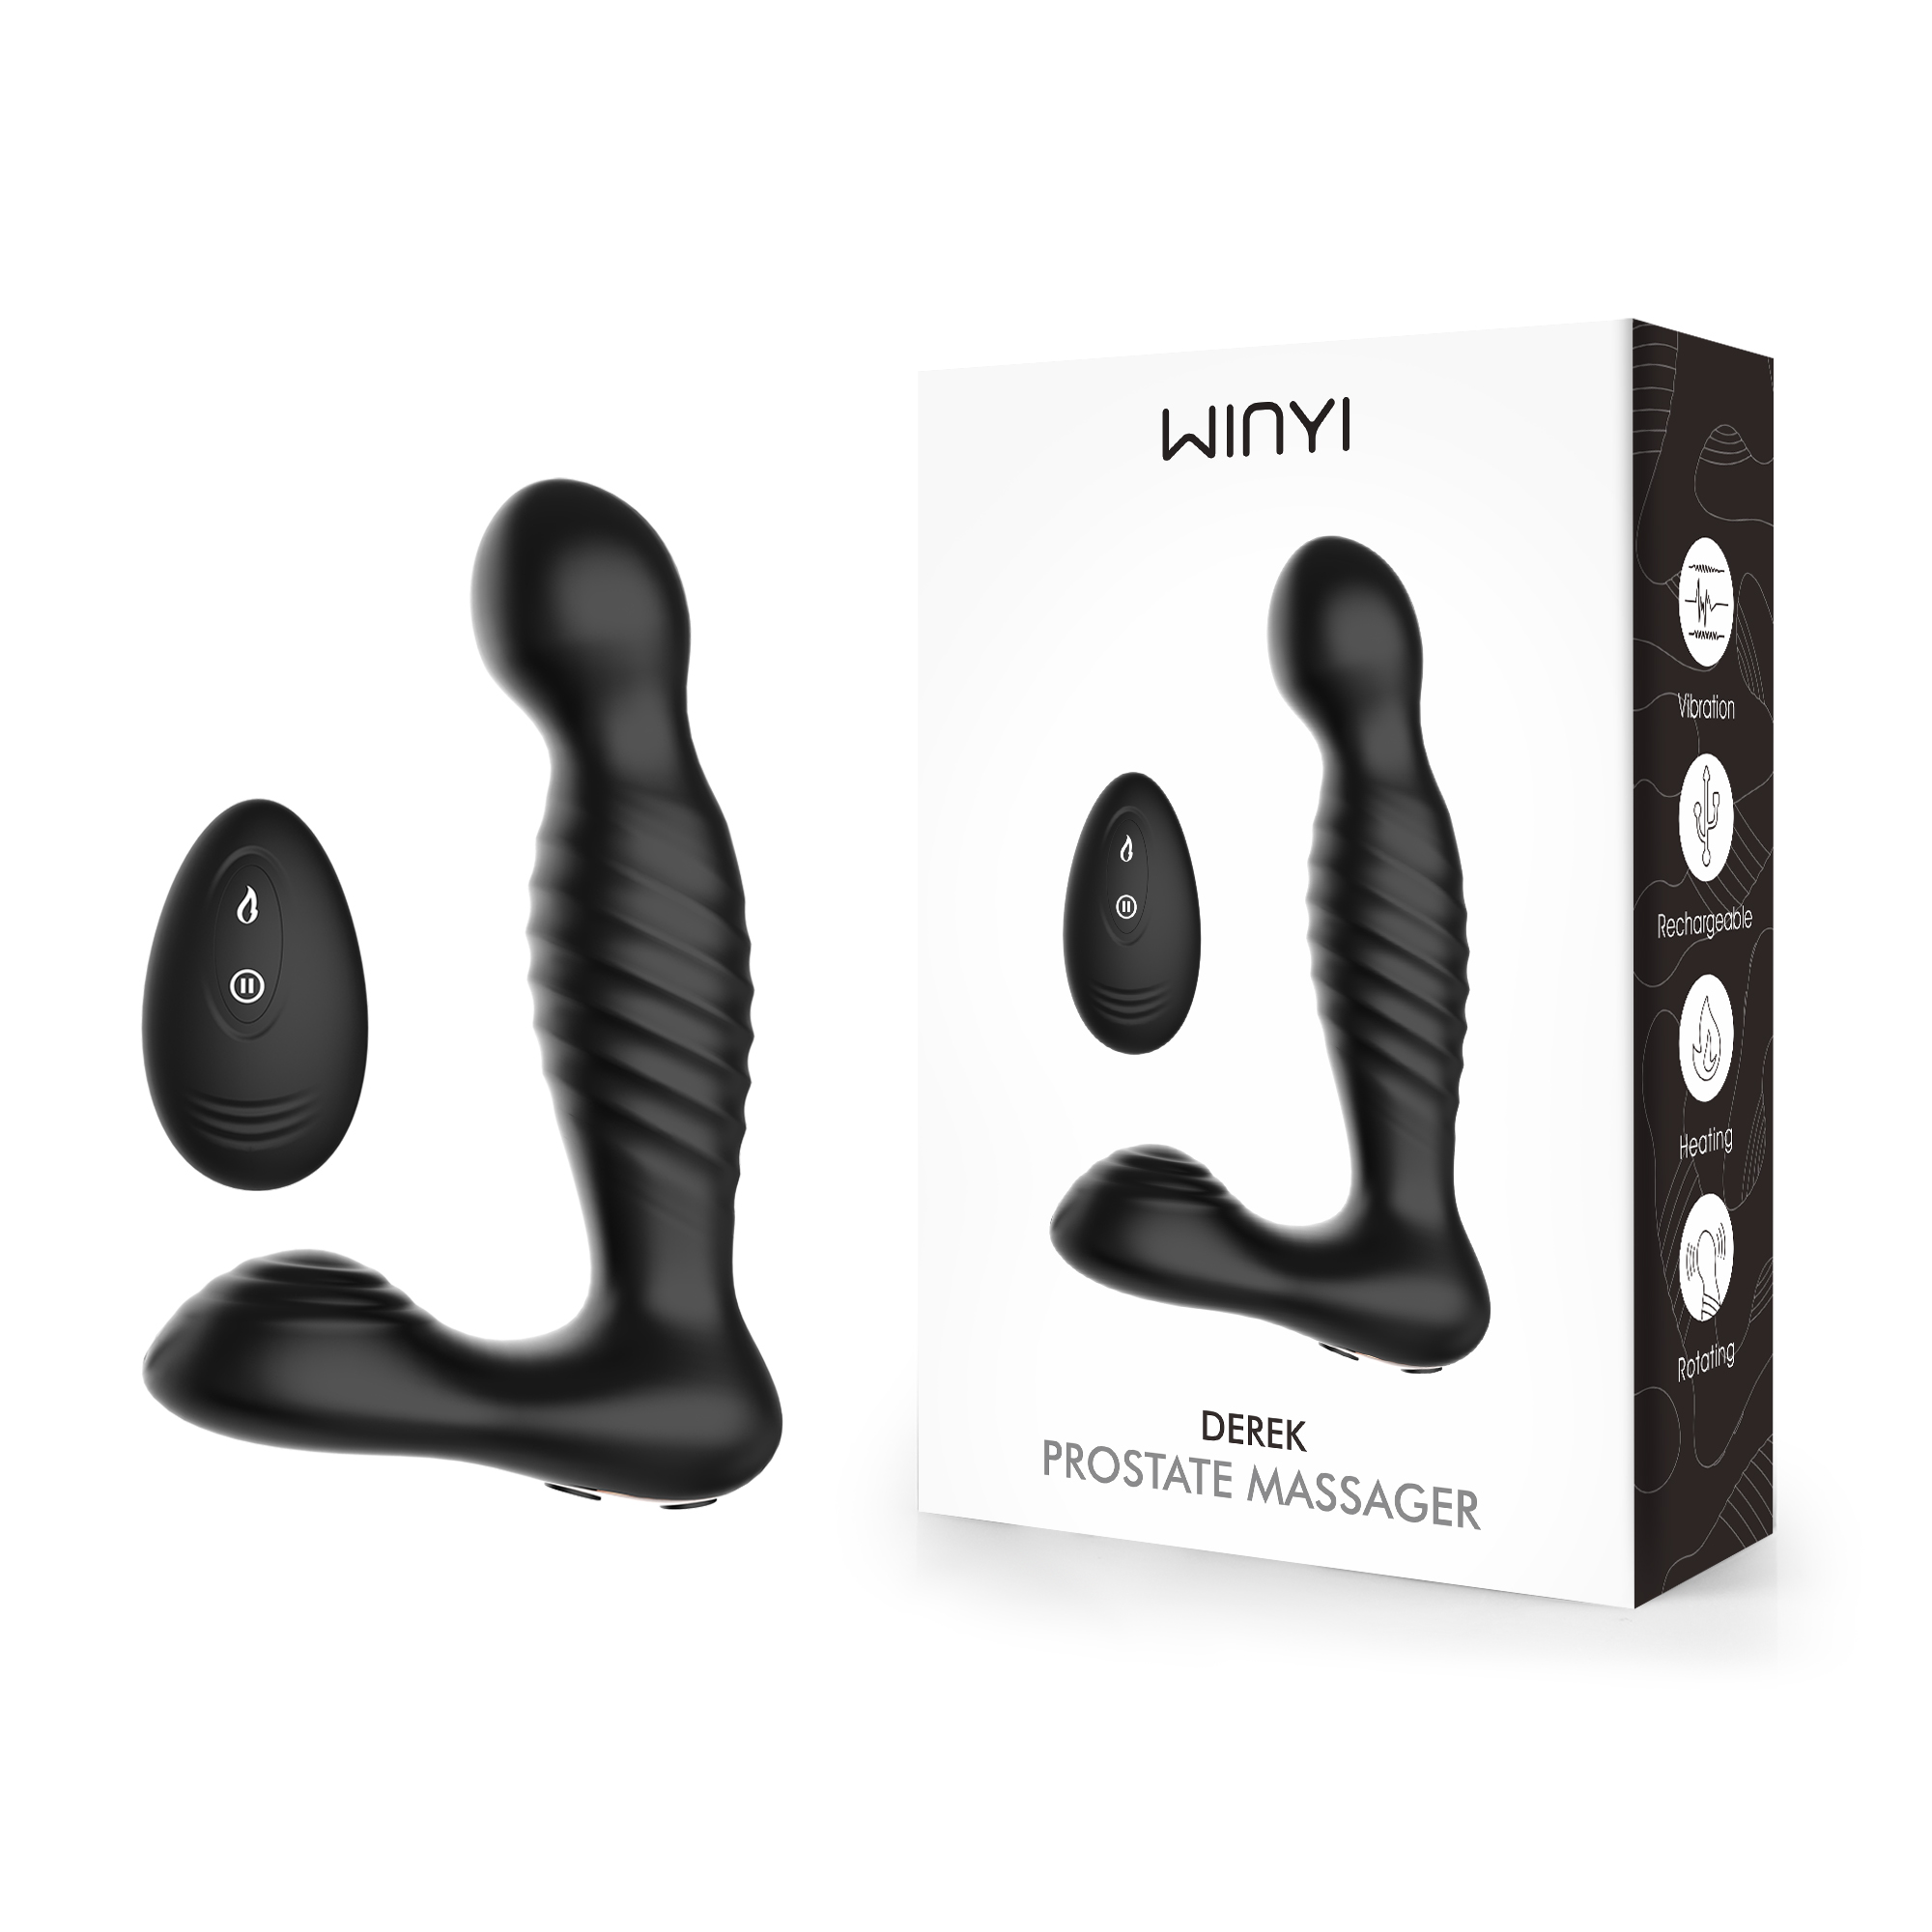 WY0619-Prostate Massager Manufacturer-OEM ODM service available factory-Wide Range Of Quality Products-Industry-trusted Vendor-Private Label full customization-WINYI-Official Websiteszwinyi.com/winyi.net-2023 New Sex Toy